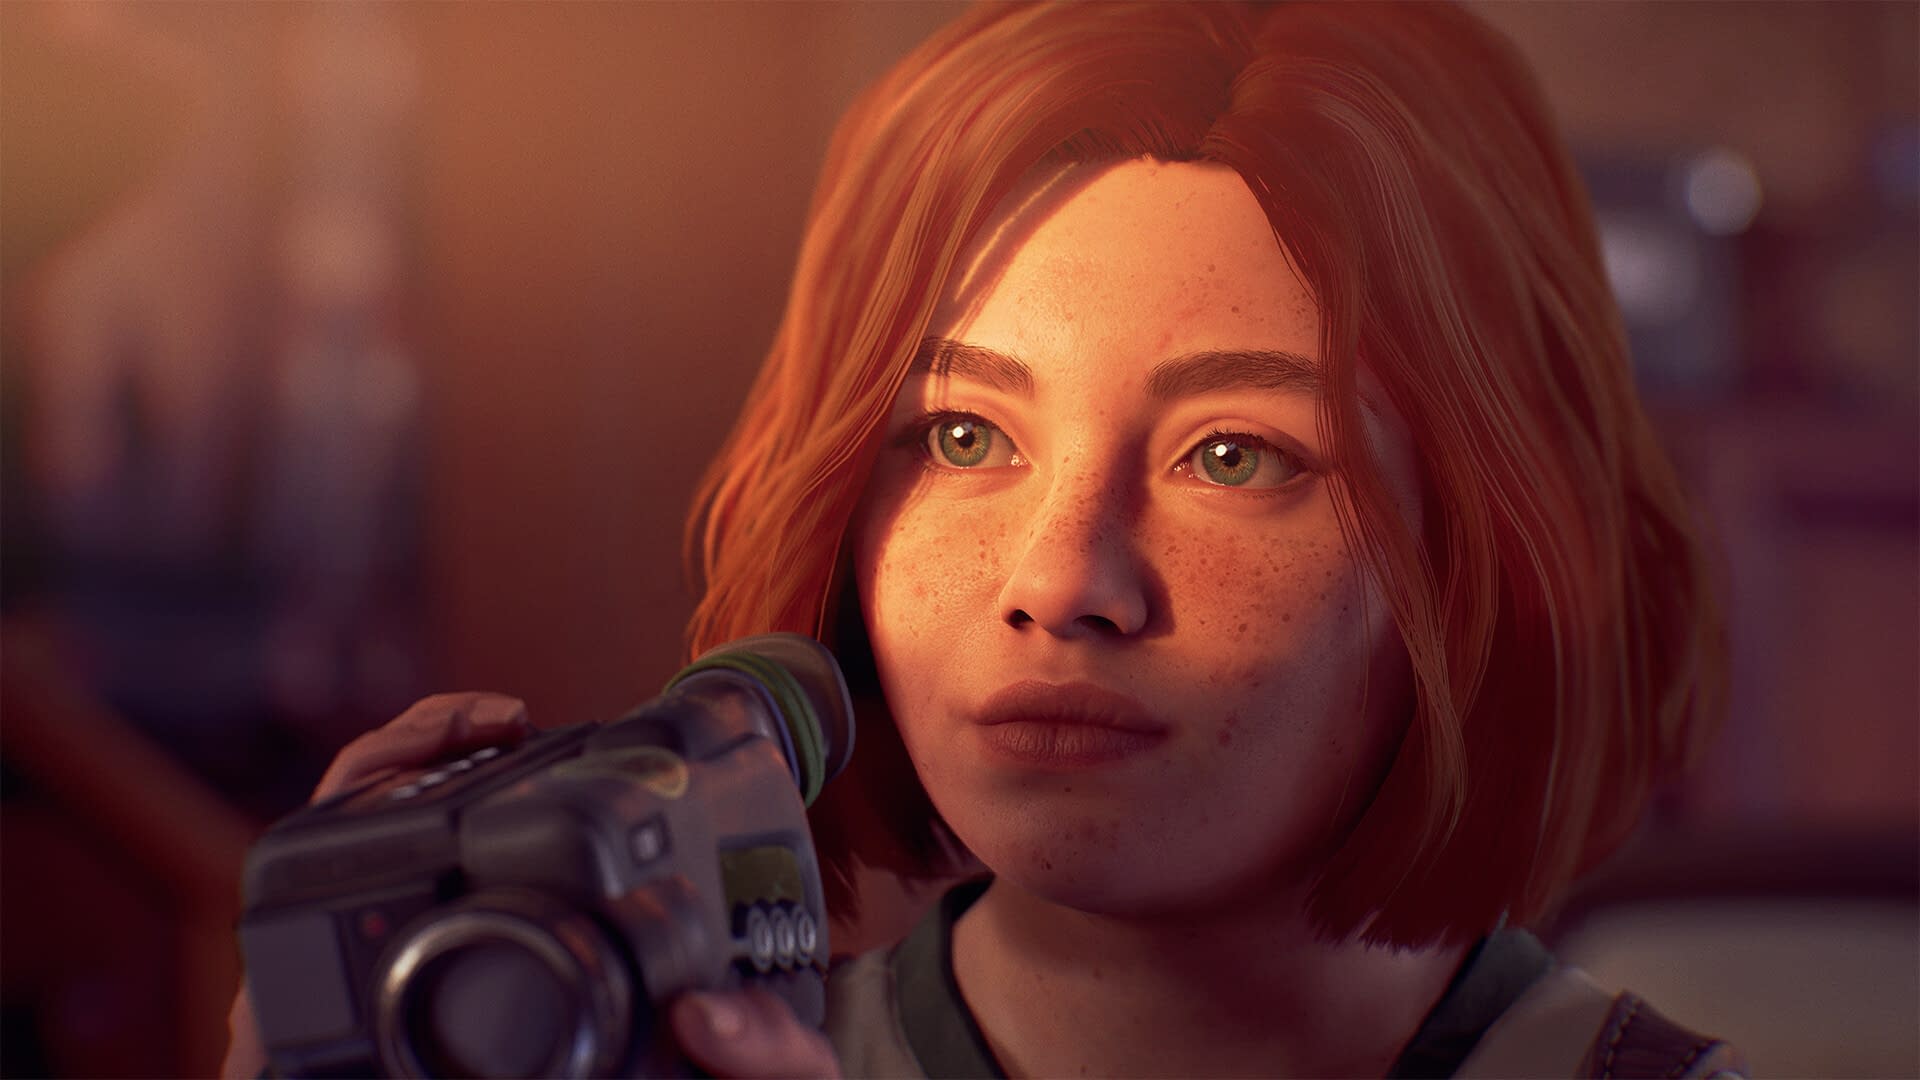 Fragman Released from New Game of Life is Strange Producers